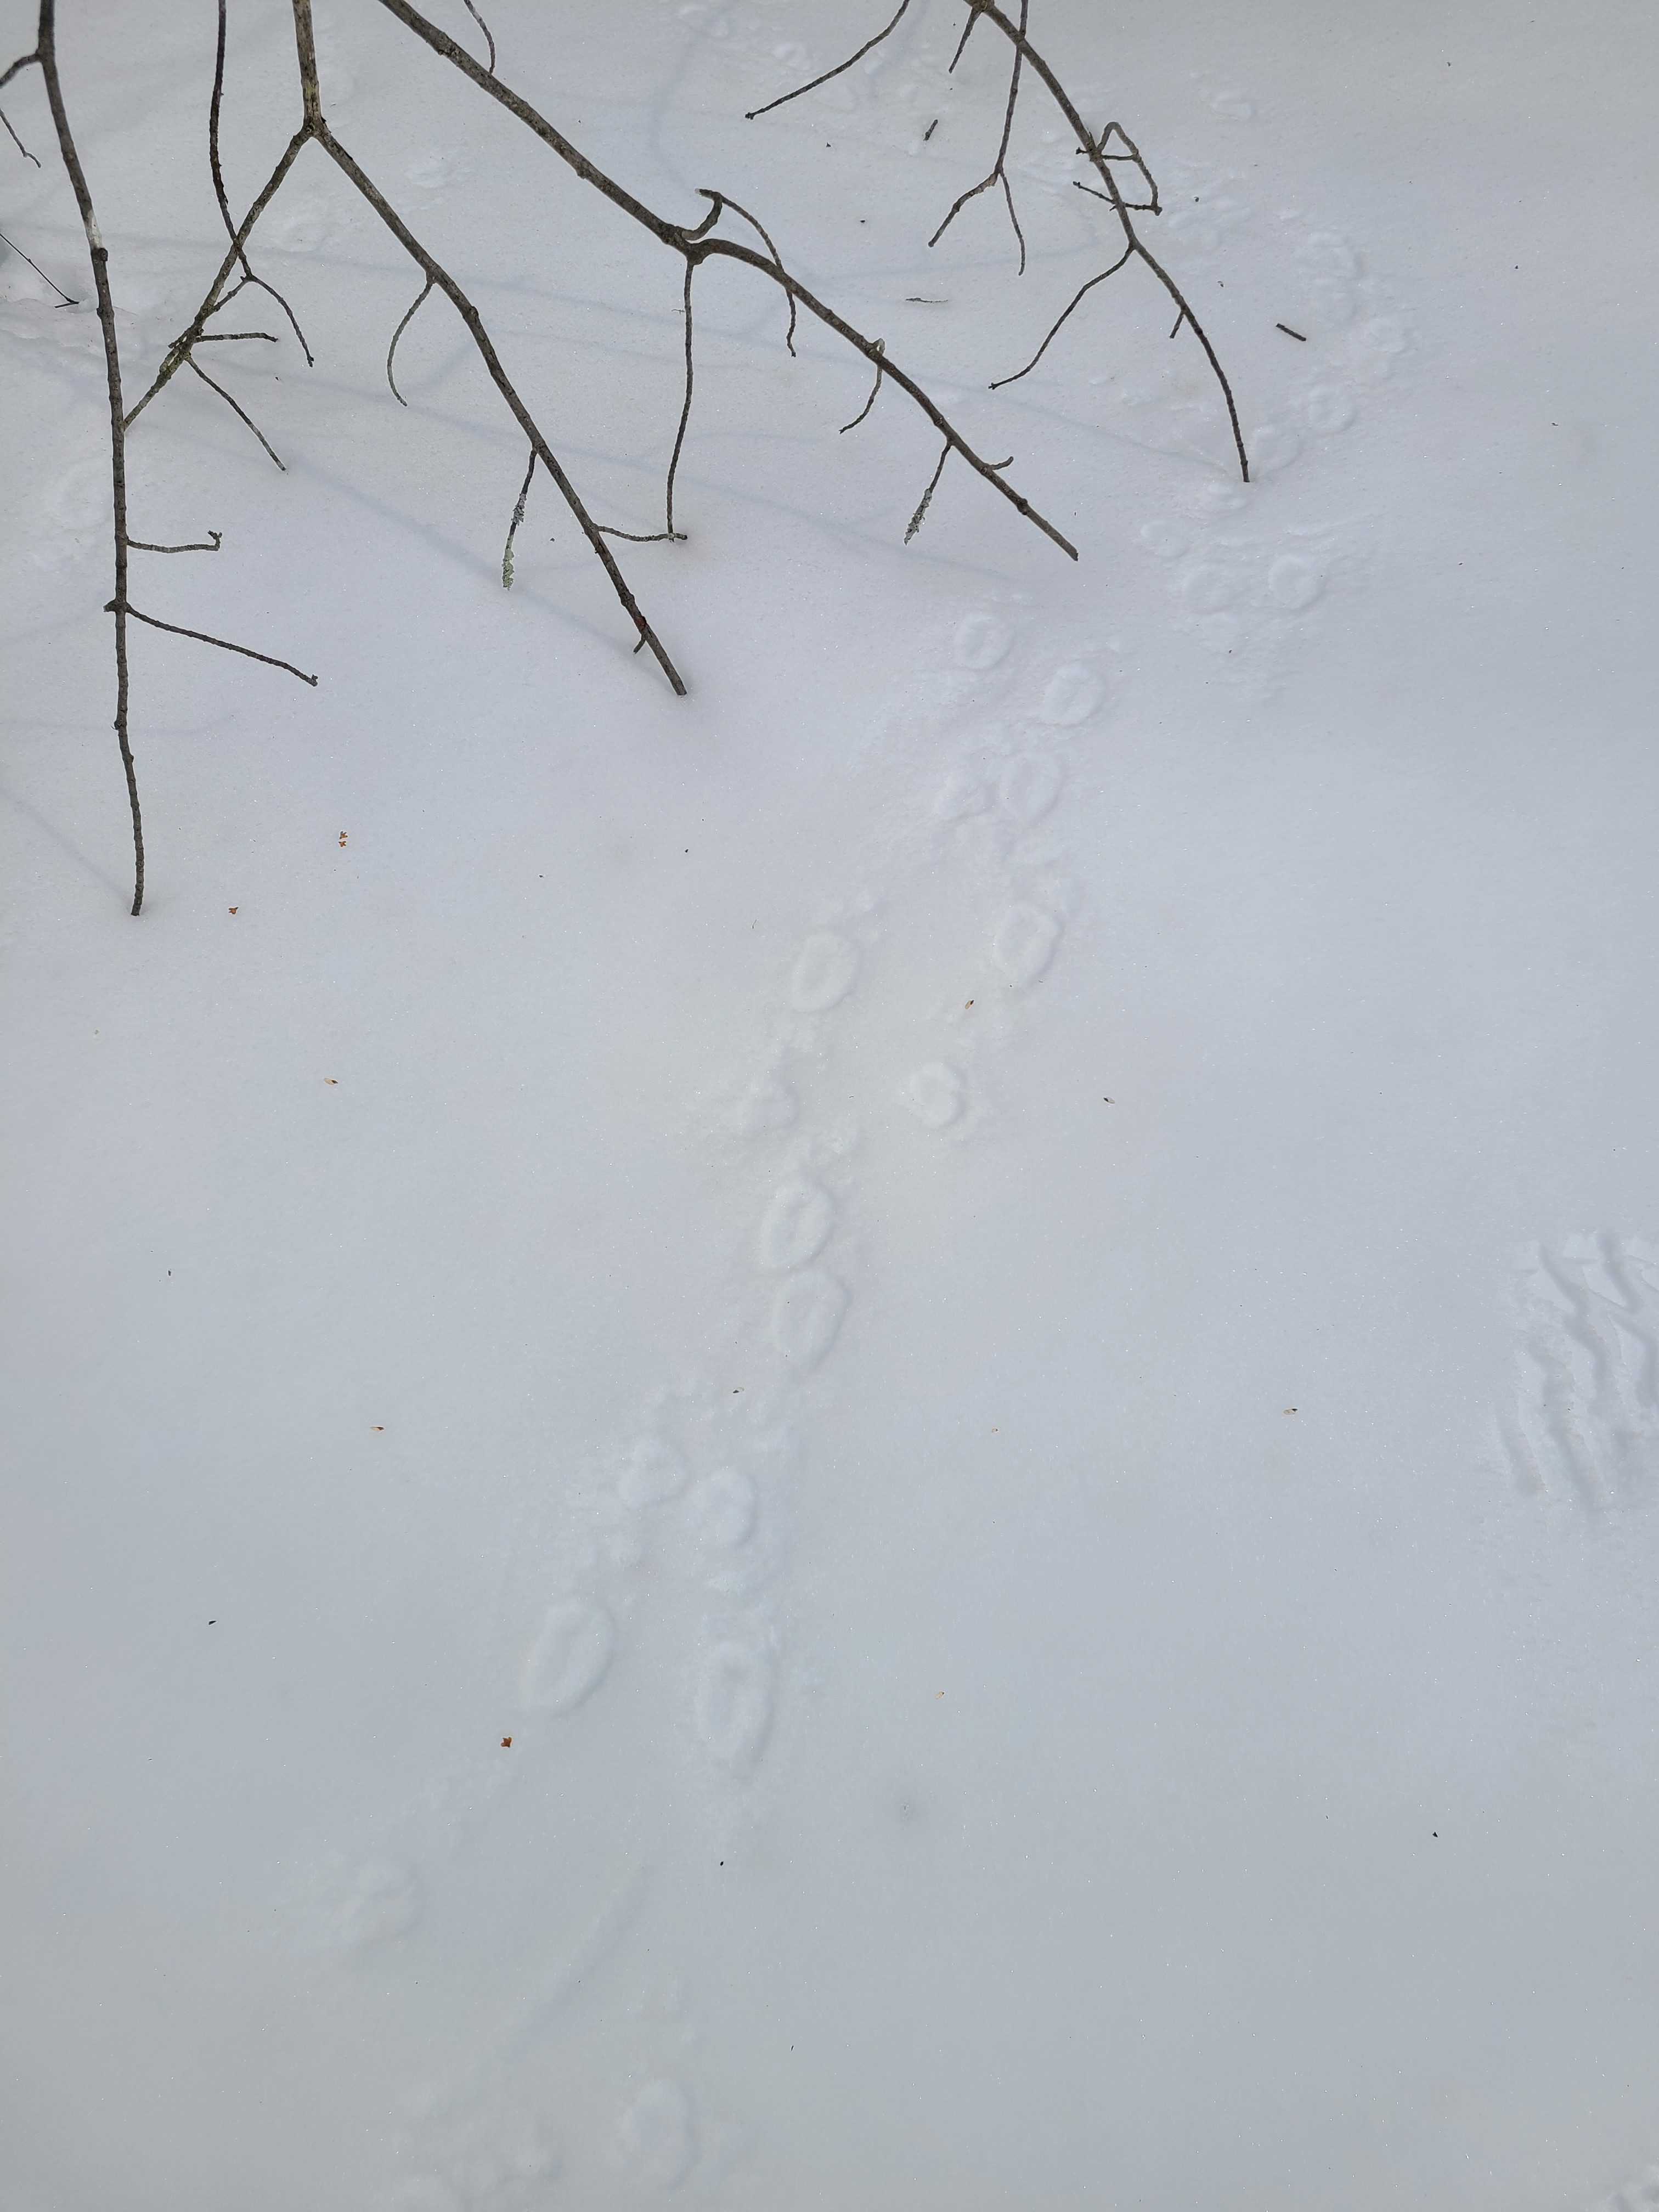 porcupine track in the snow